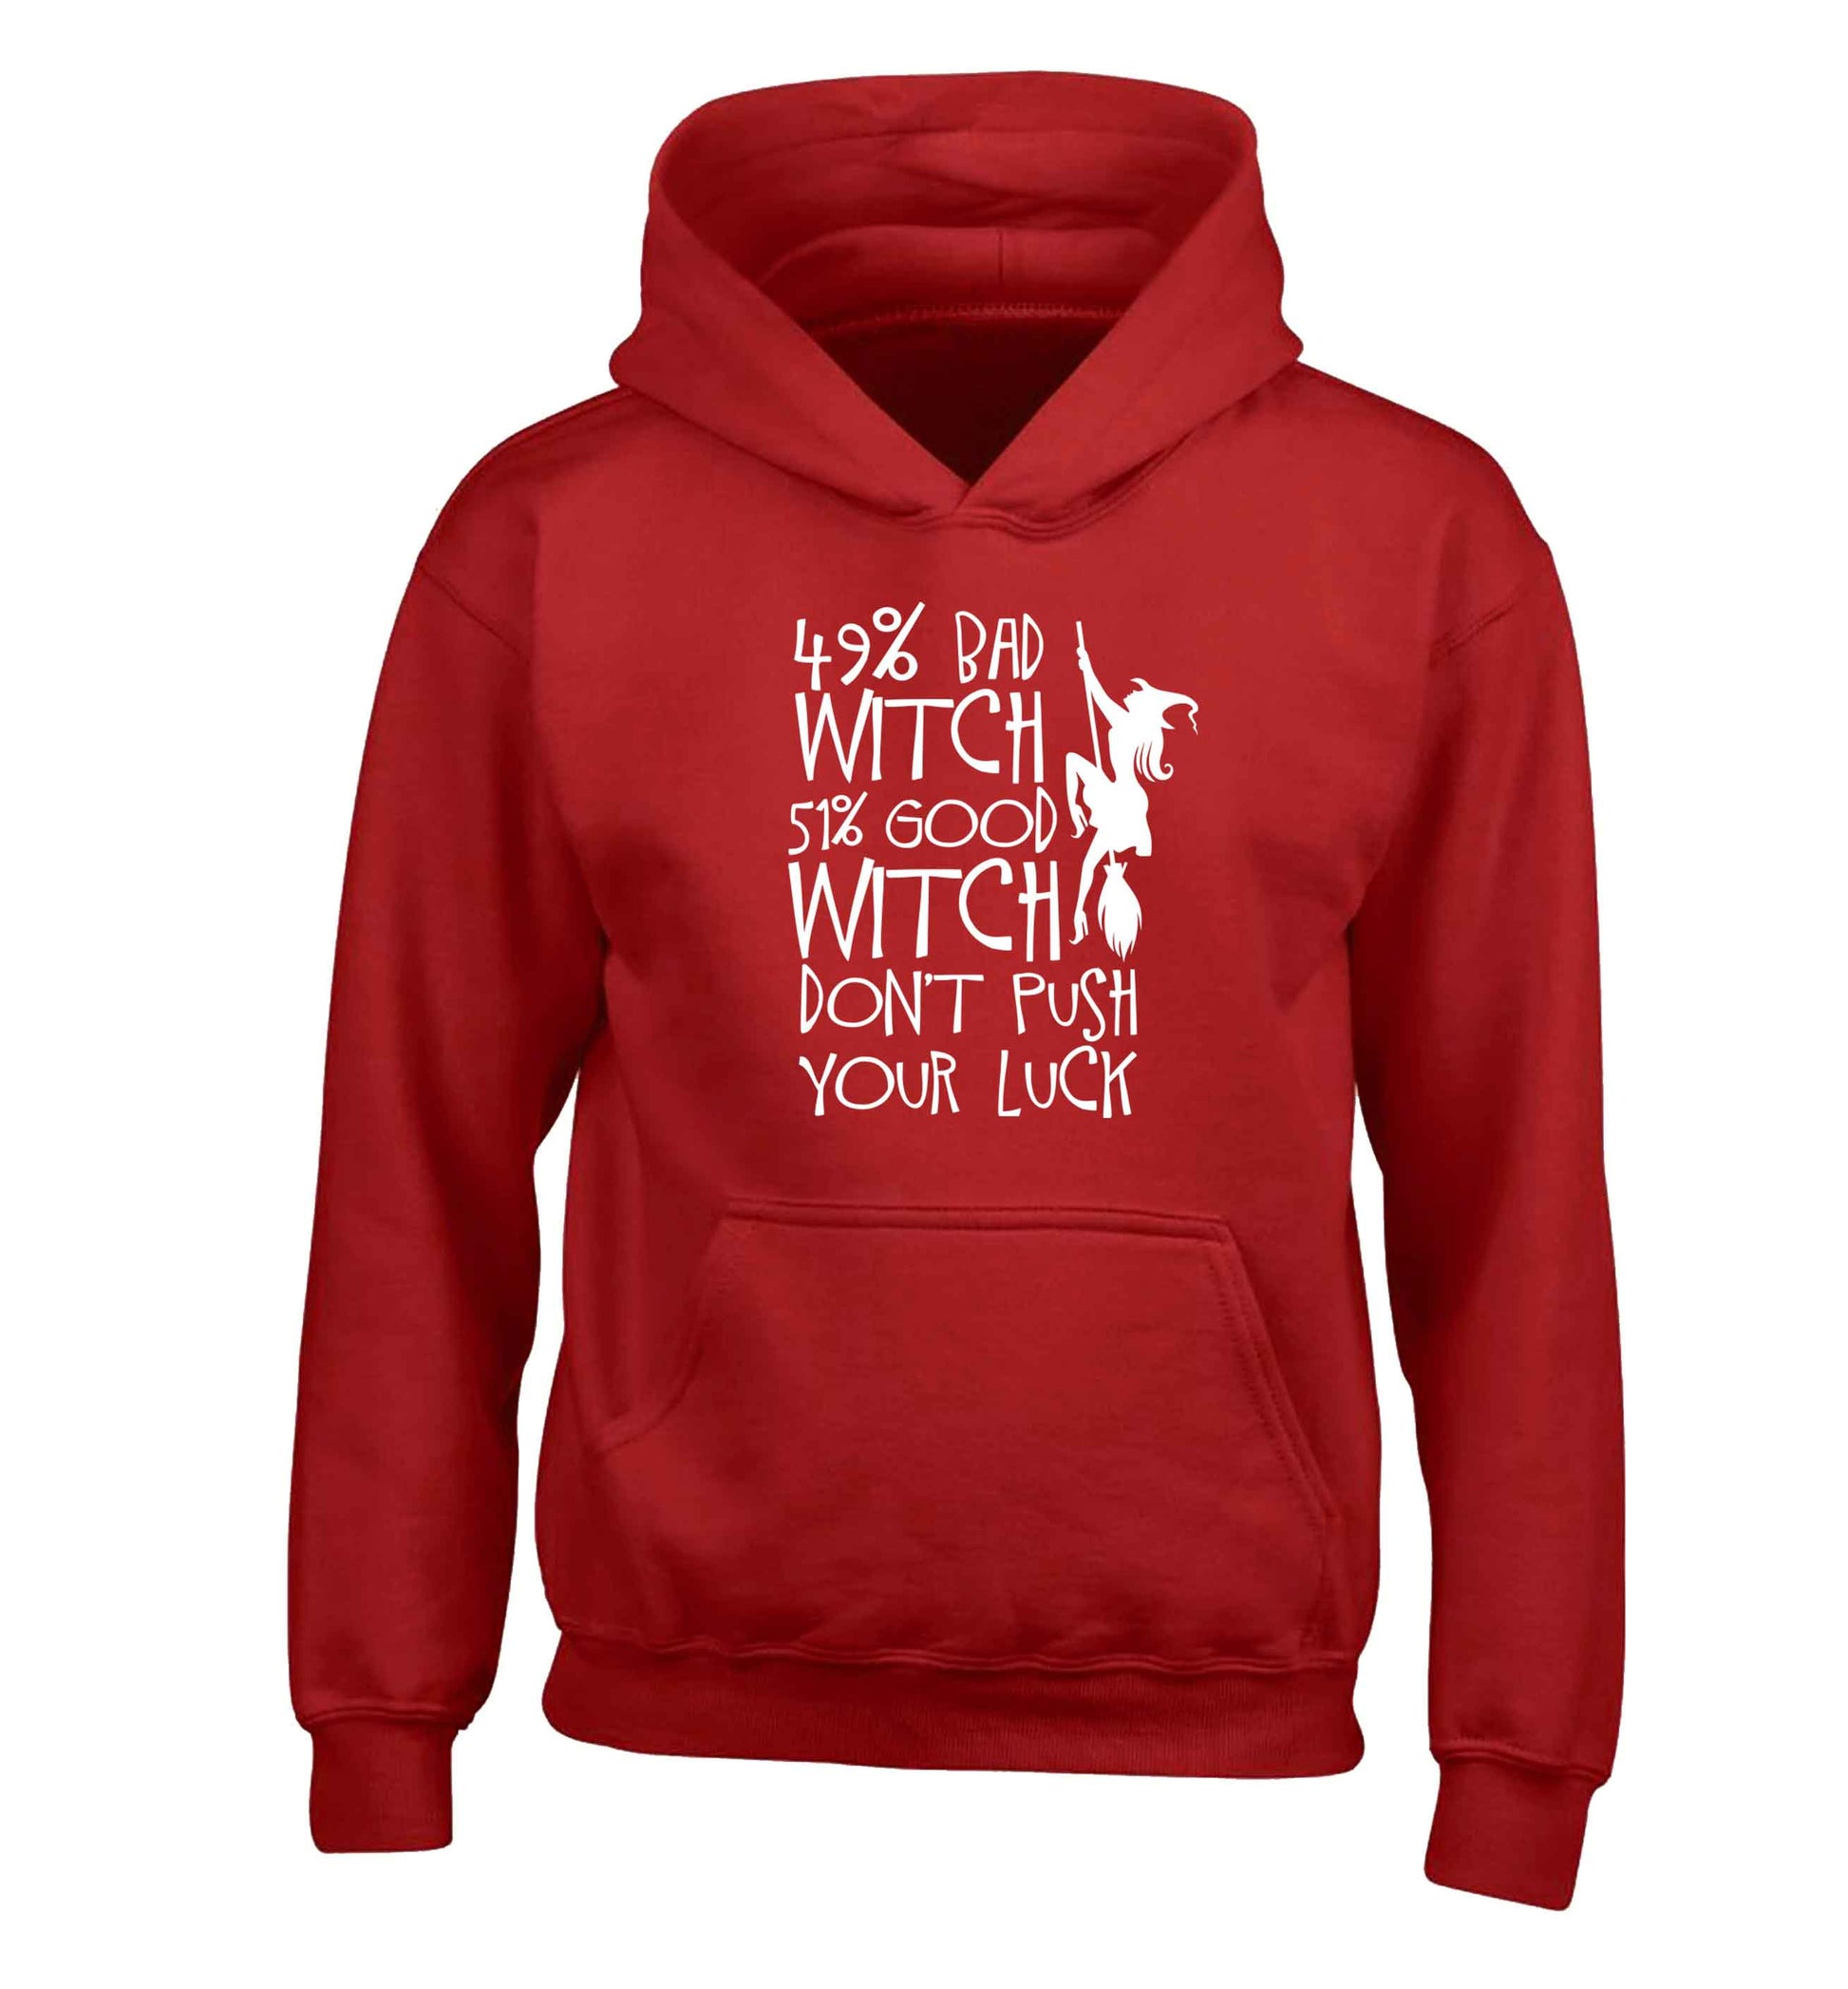 49% bad witch 51% good witch don't push your luck children's red hoodie 12-13 Years